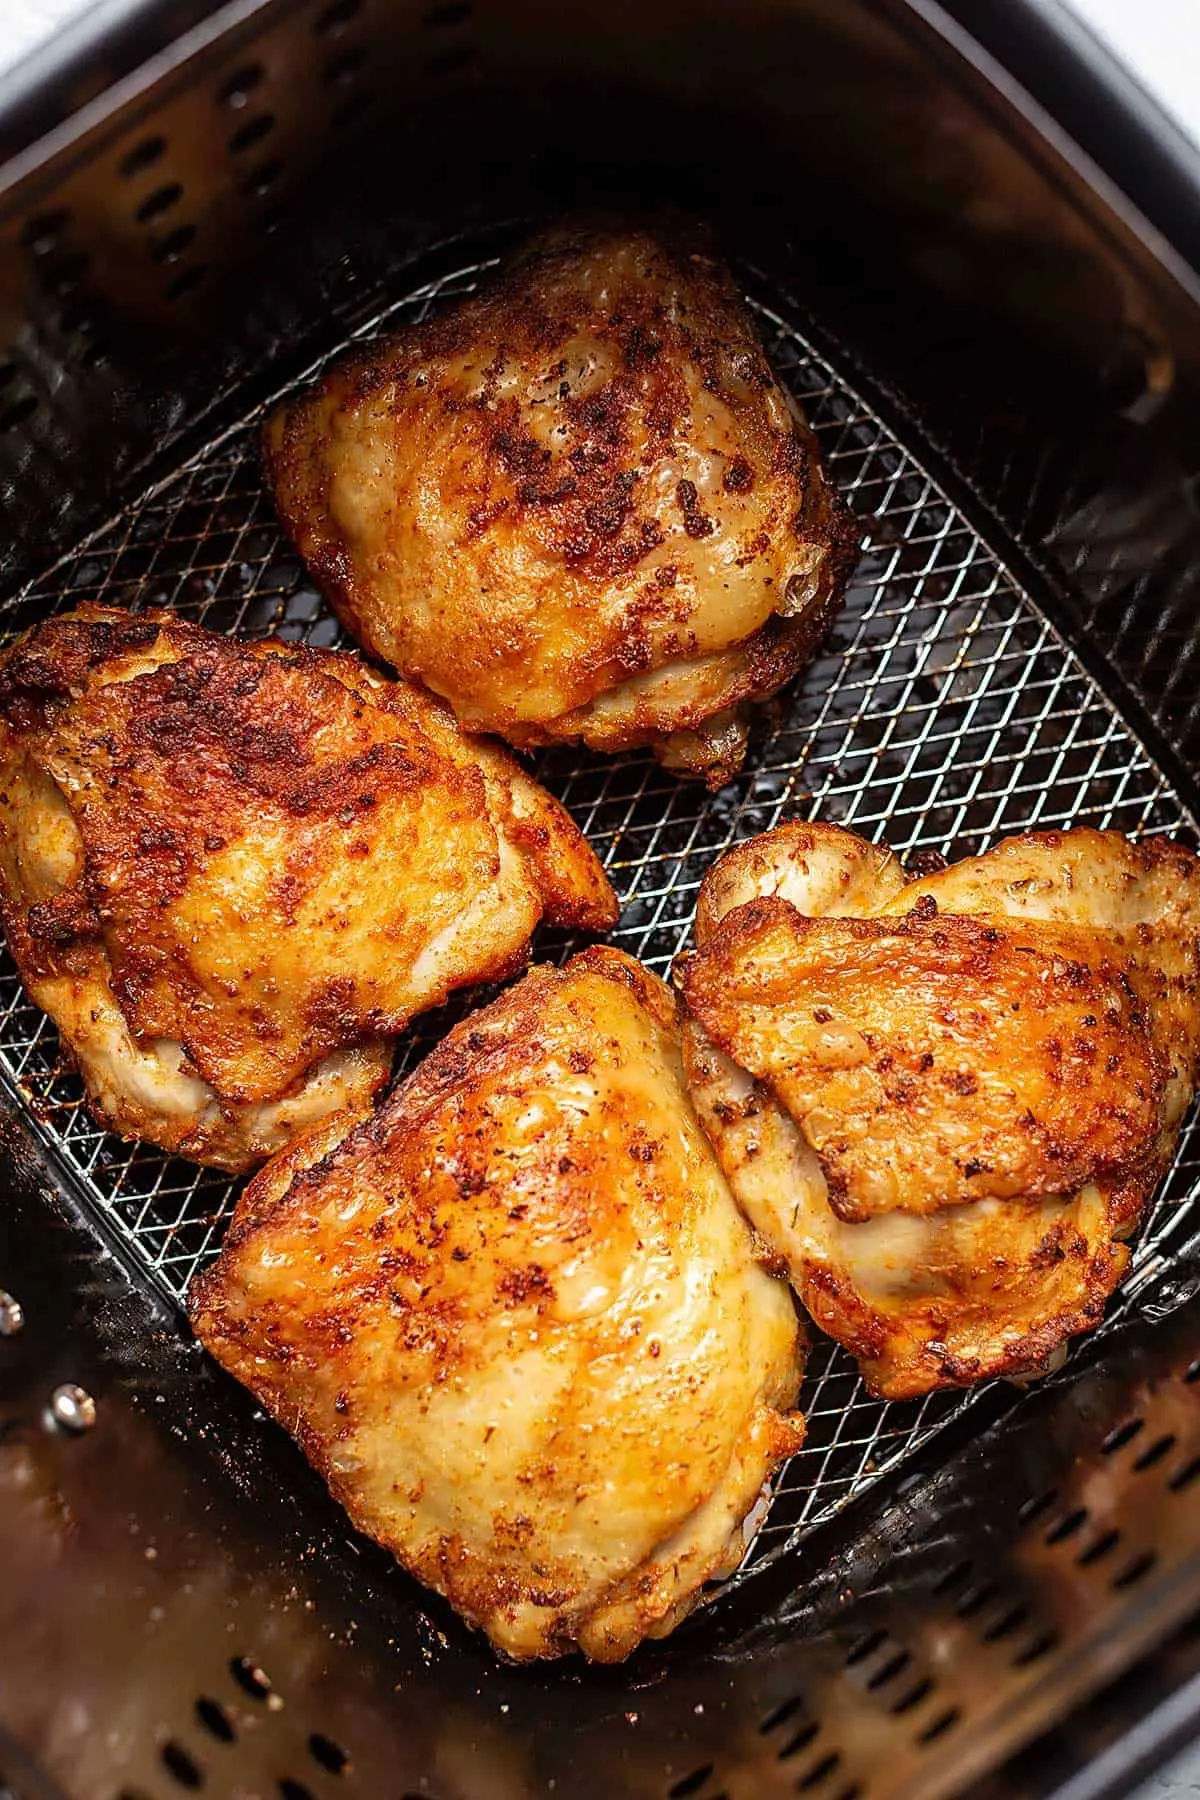 How to Cook Chicken in an Air Fryer